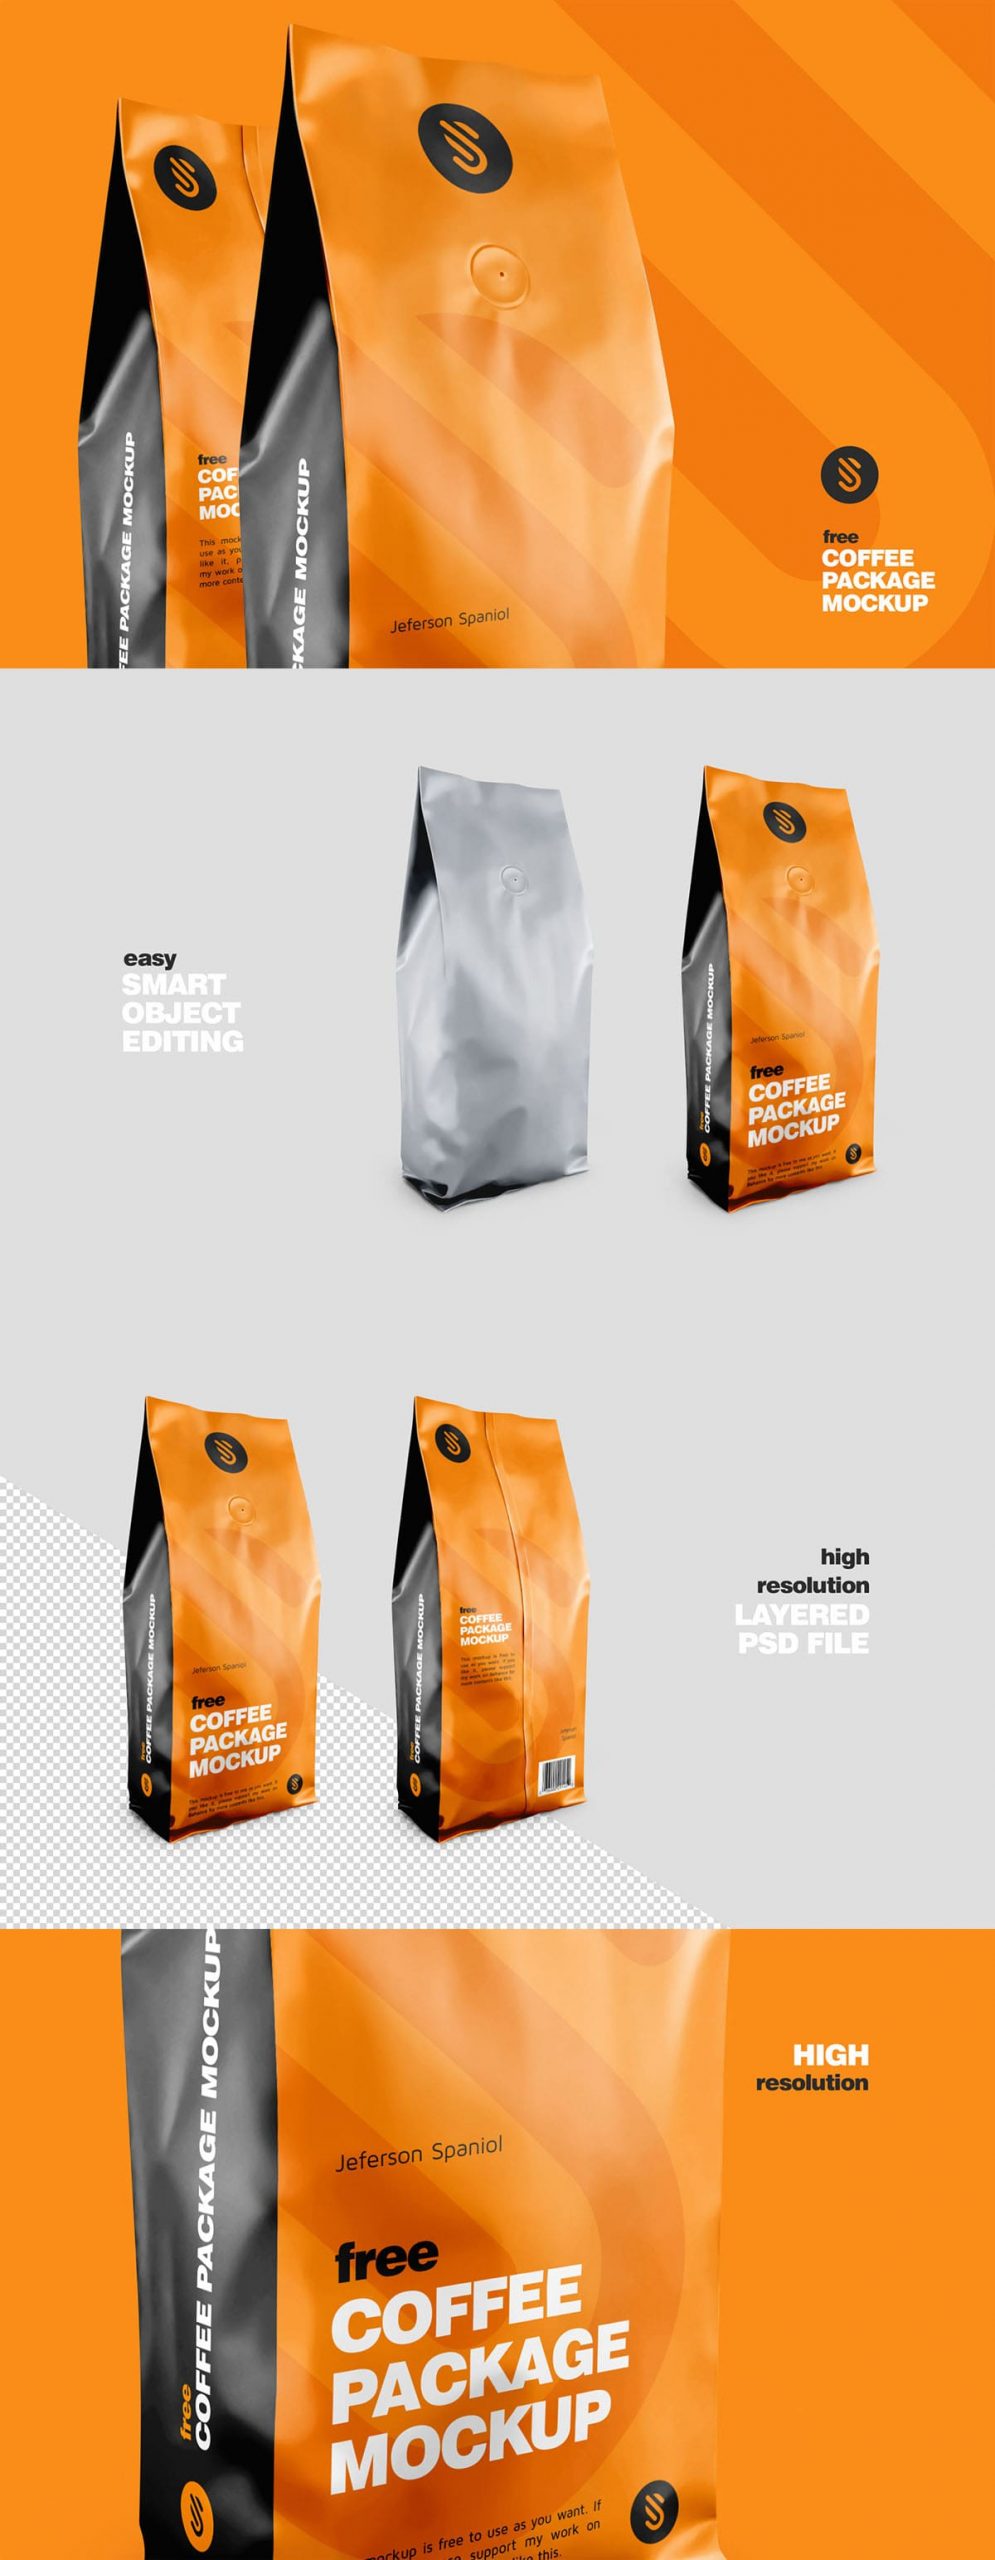 Download Free Coffee Package Mockup Psd Find The Perfect Creative Mockups Freebies To Showcase Your Project To Life